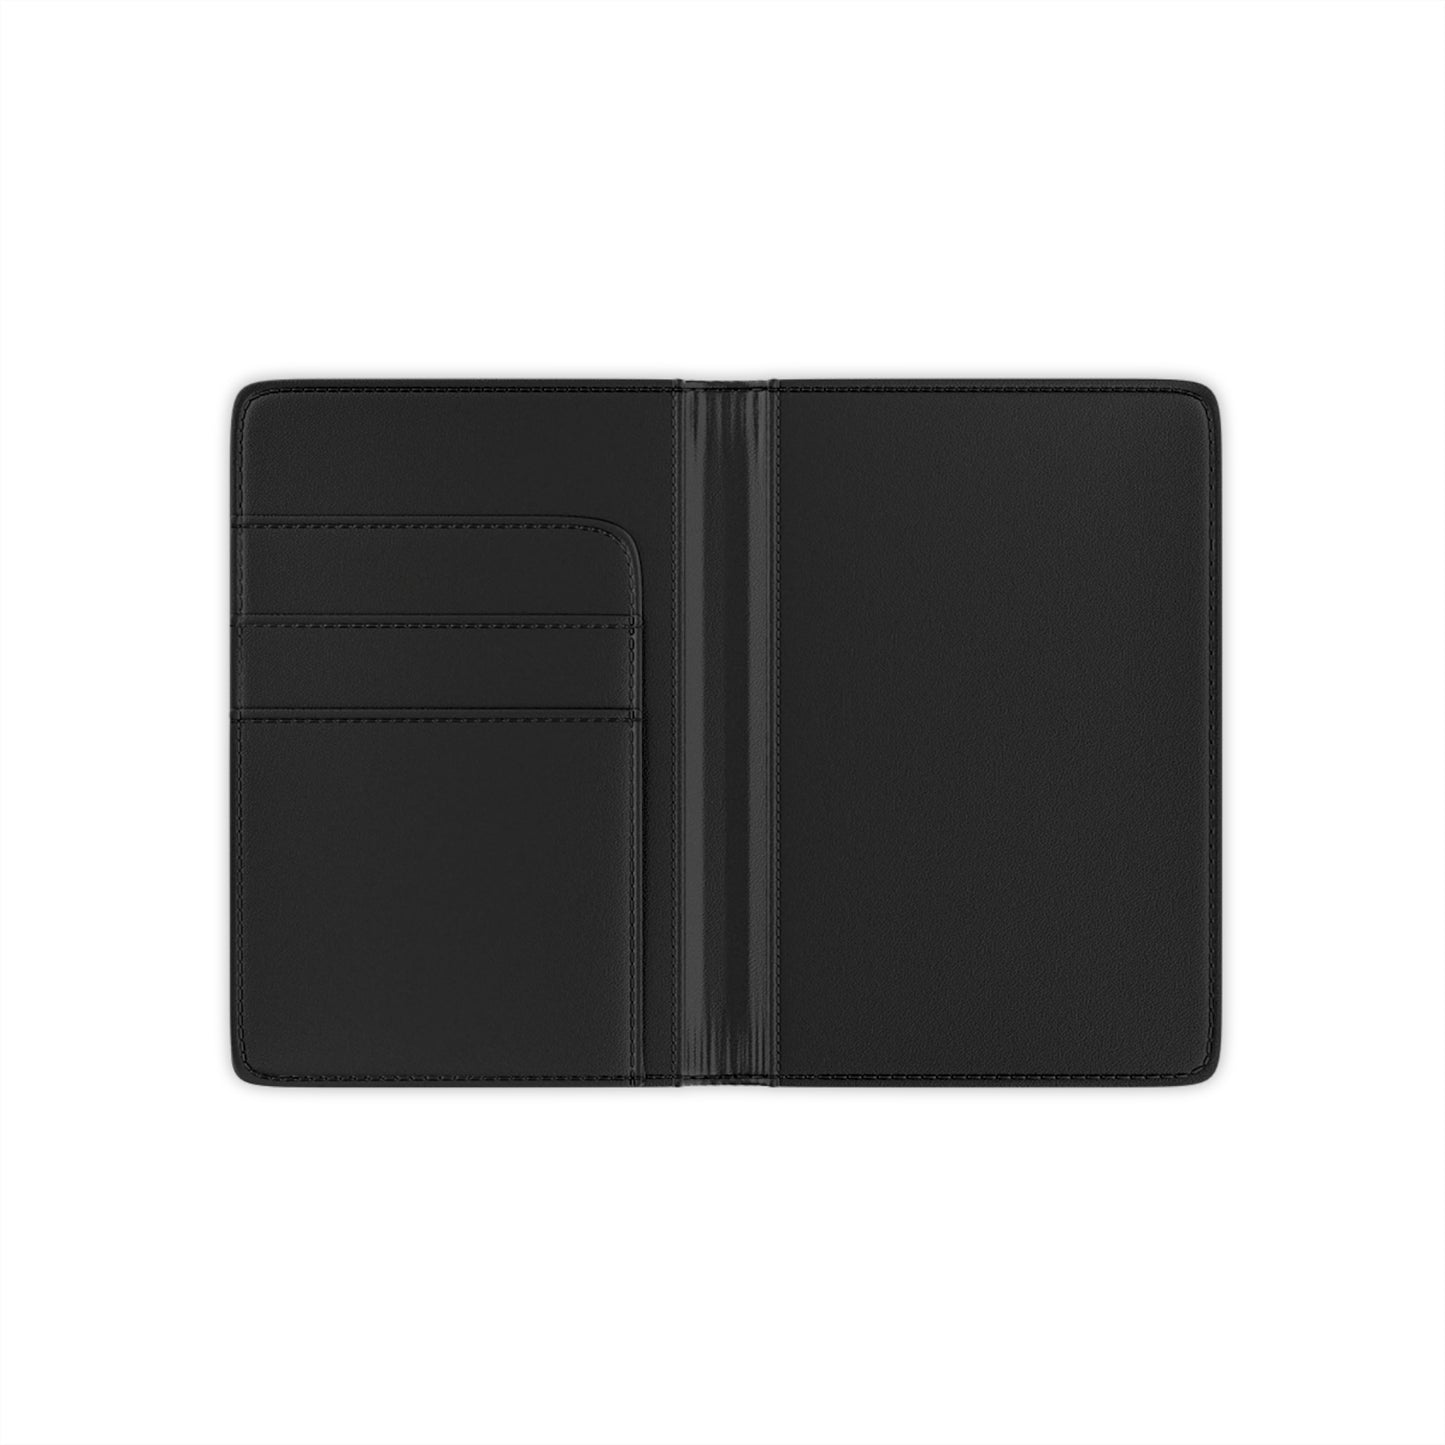 Making Every Time Zone My Runway - Chic Faux Leather Passport Cover, Stylish Travel Accessory